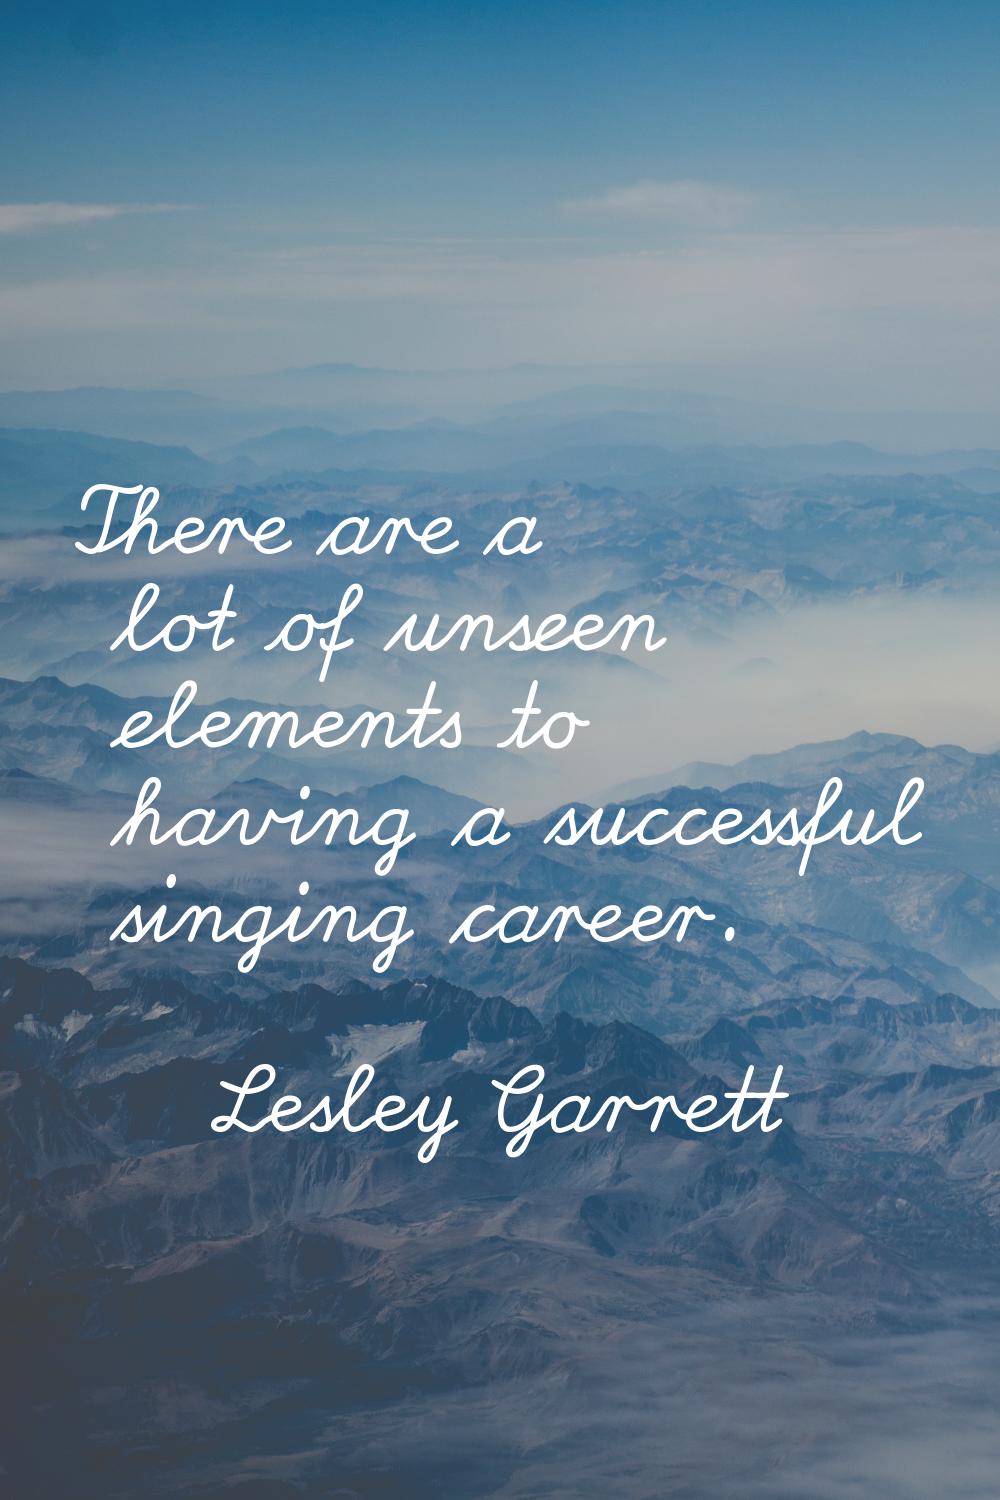 There are a lot of unseen elements to having a successful singing career.